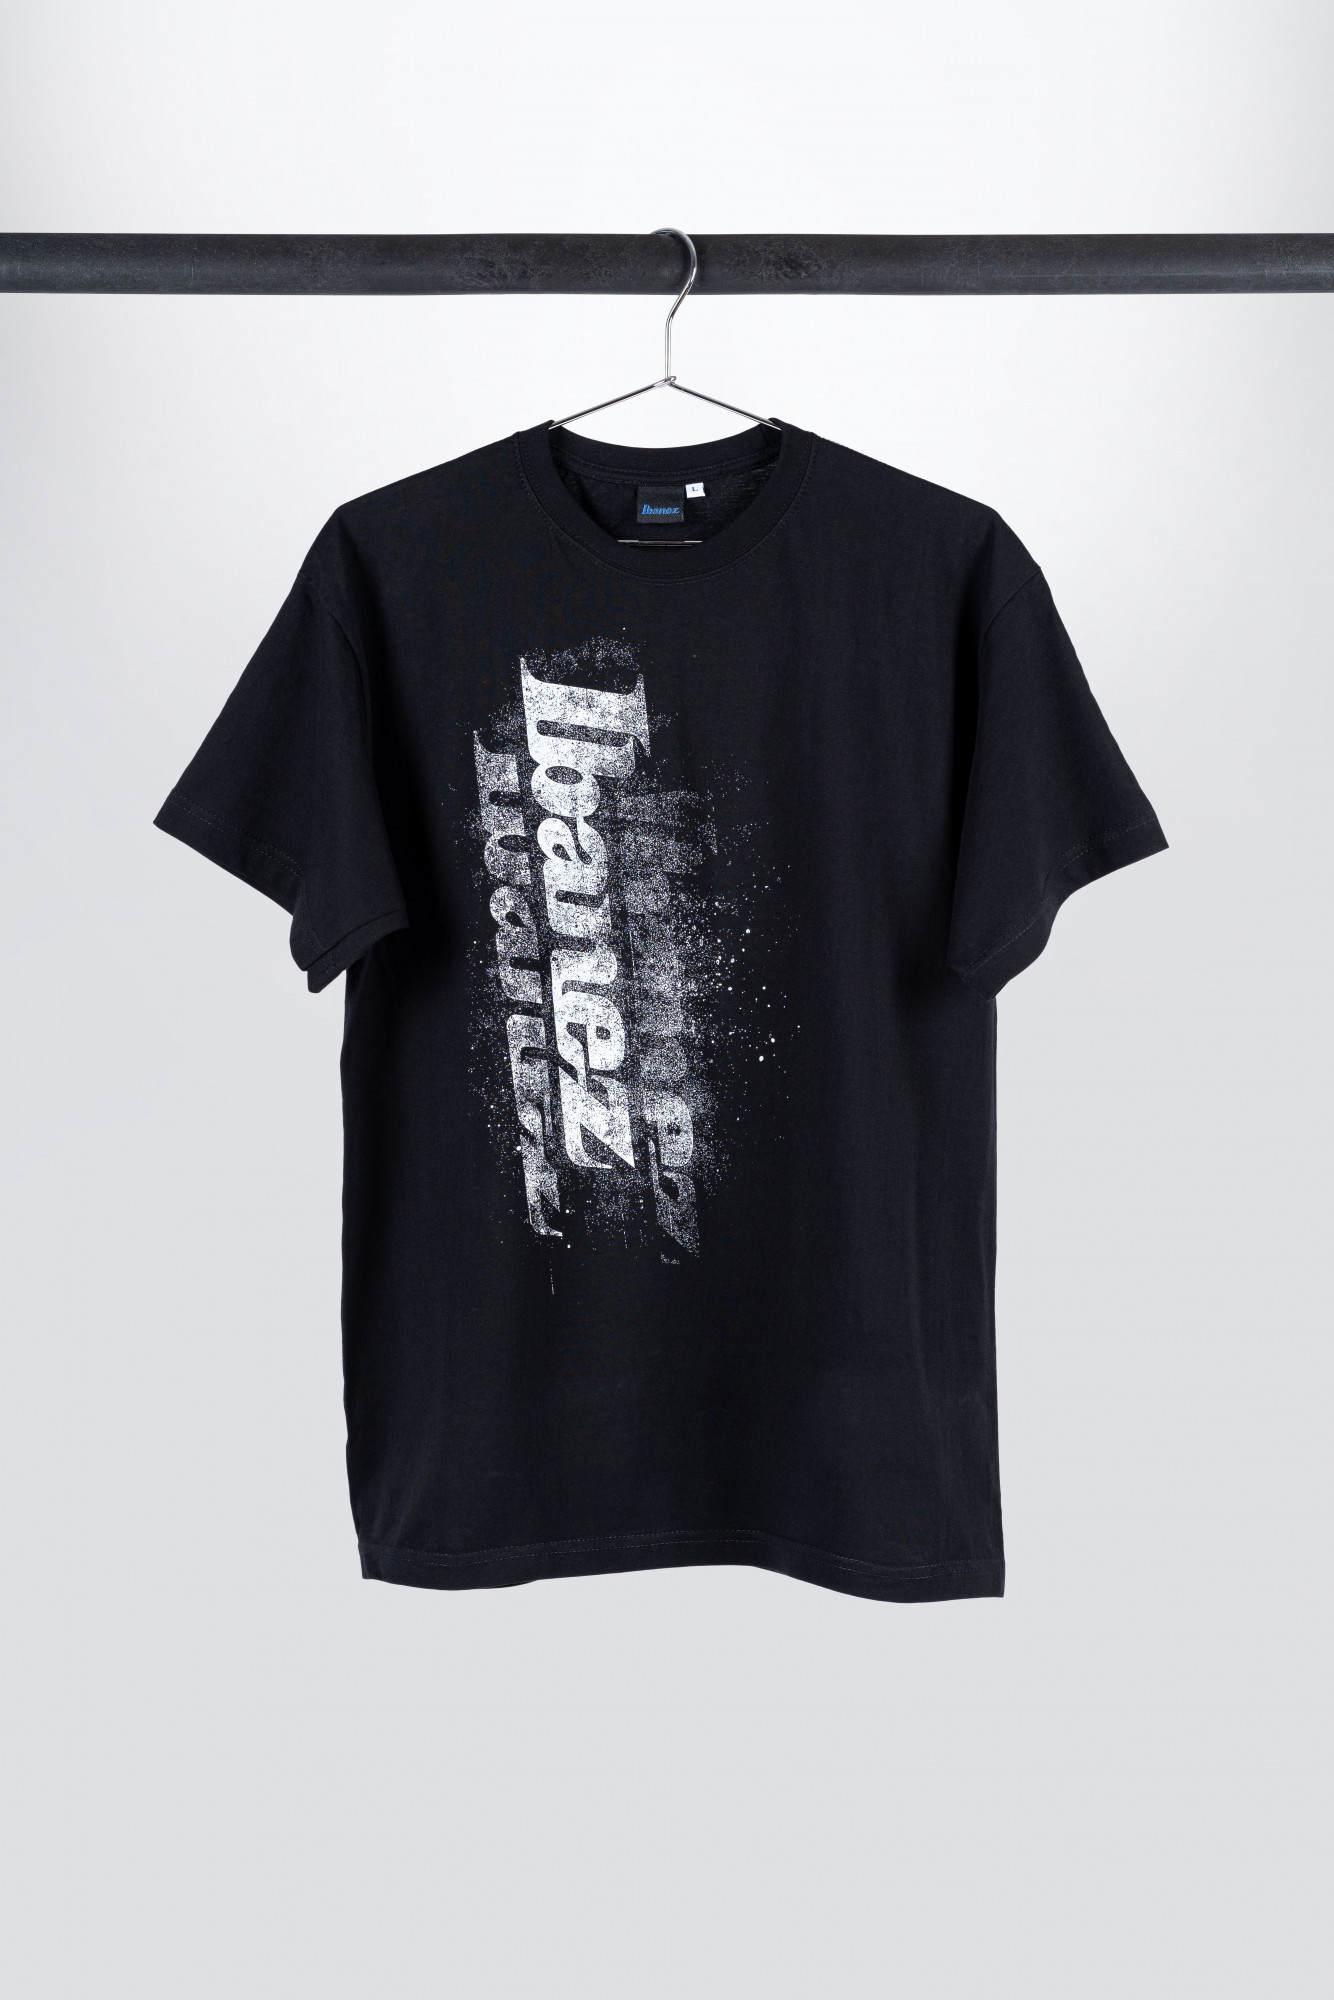 Black Ibanez t-shirt with white 